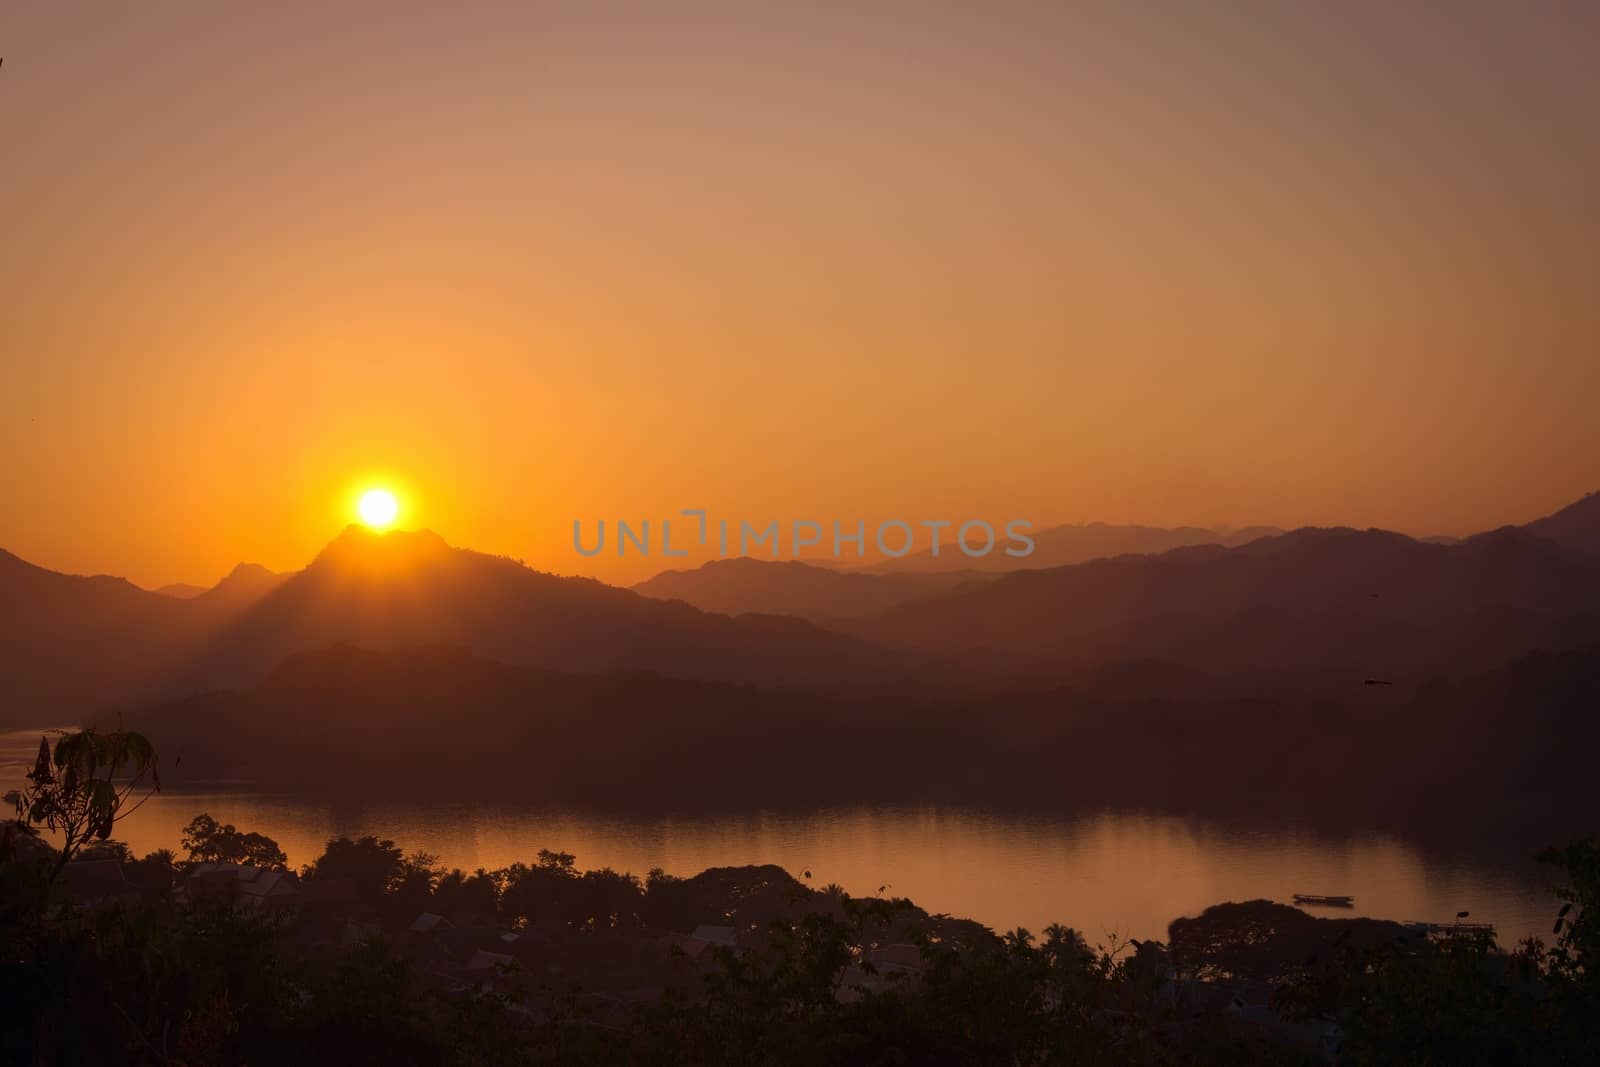 Glorious sunset over hazy mountains by the Mekong river. View from Mount Phou Si, in Luang Prabang, Laos. by hernan_hyper